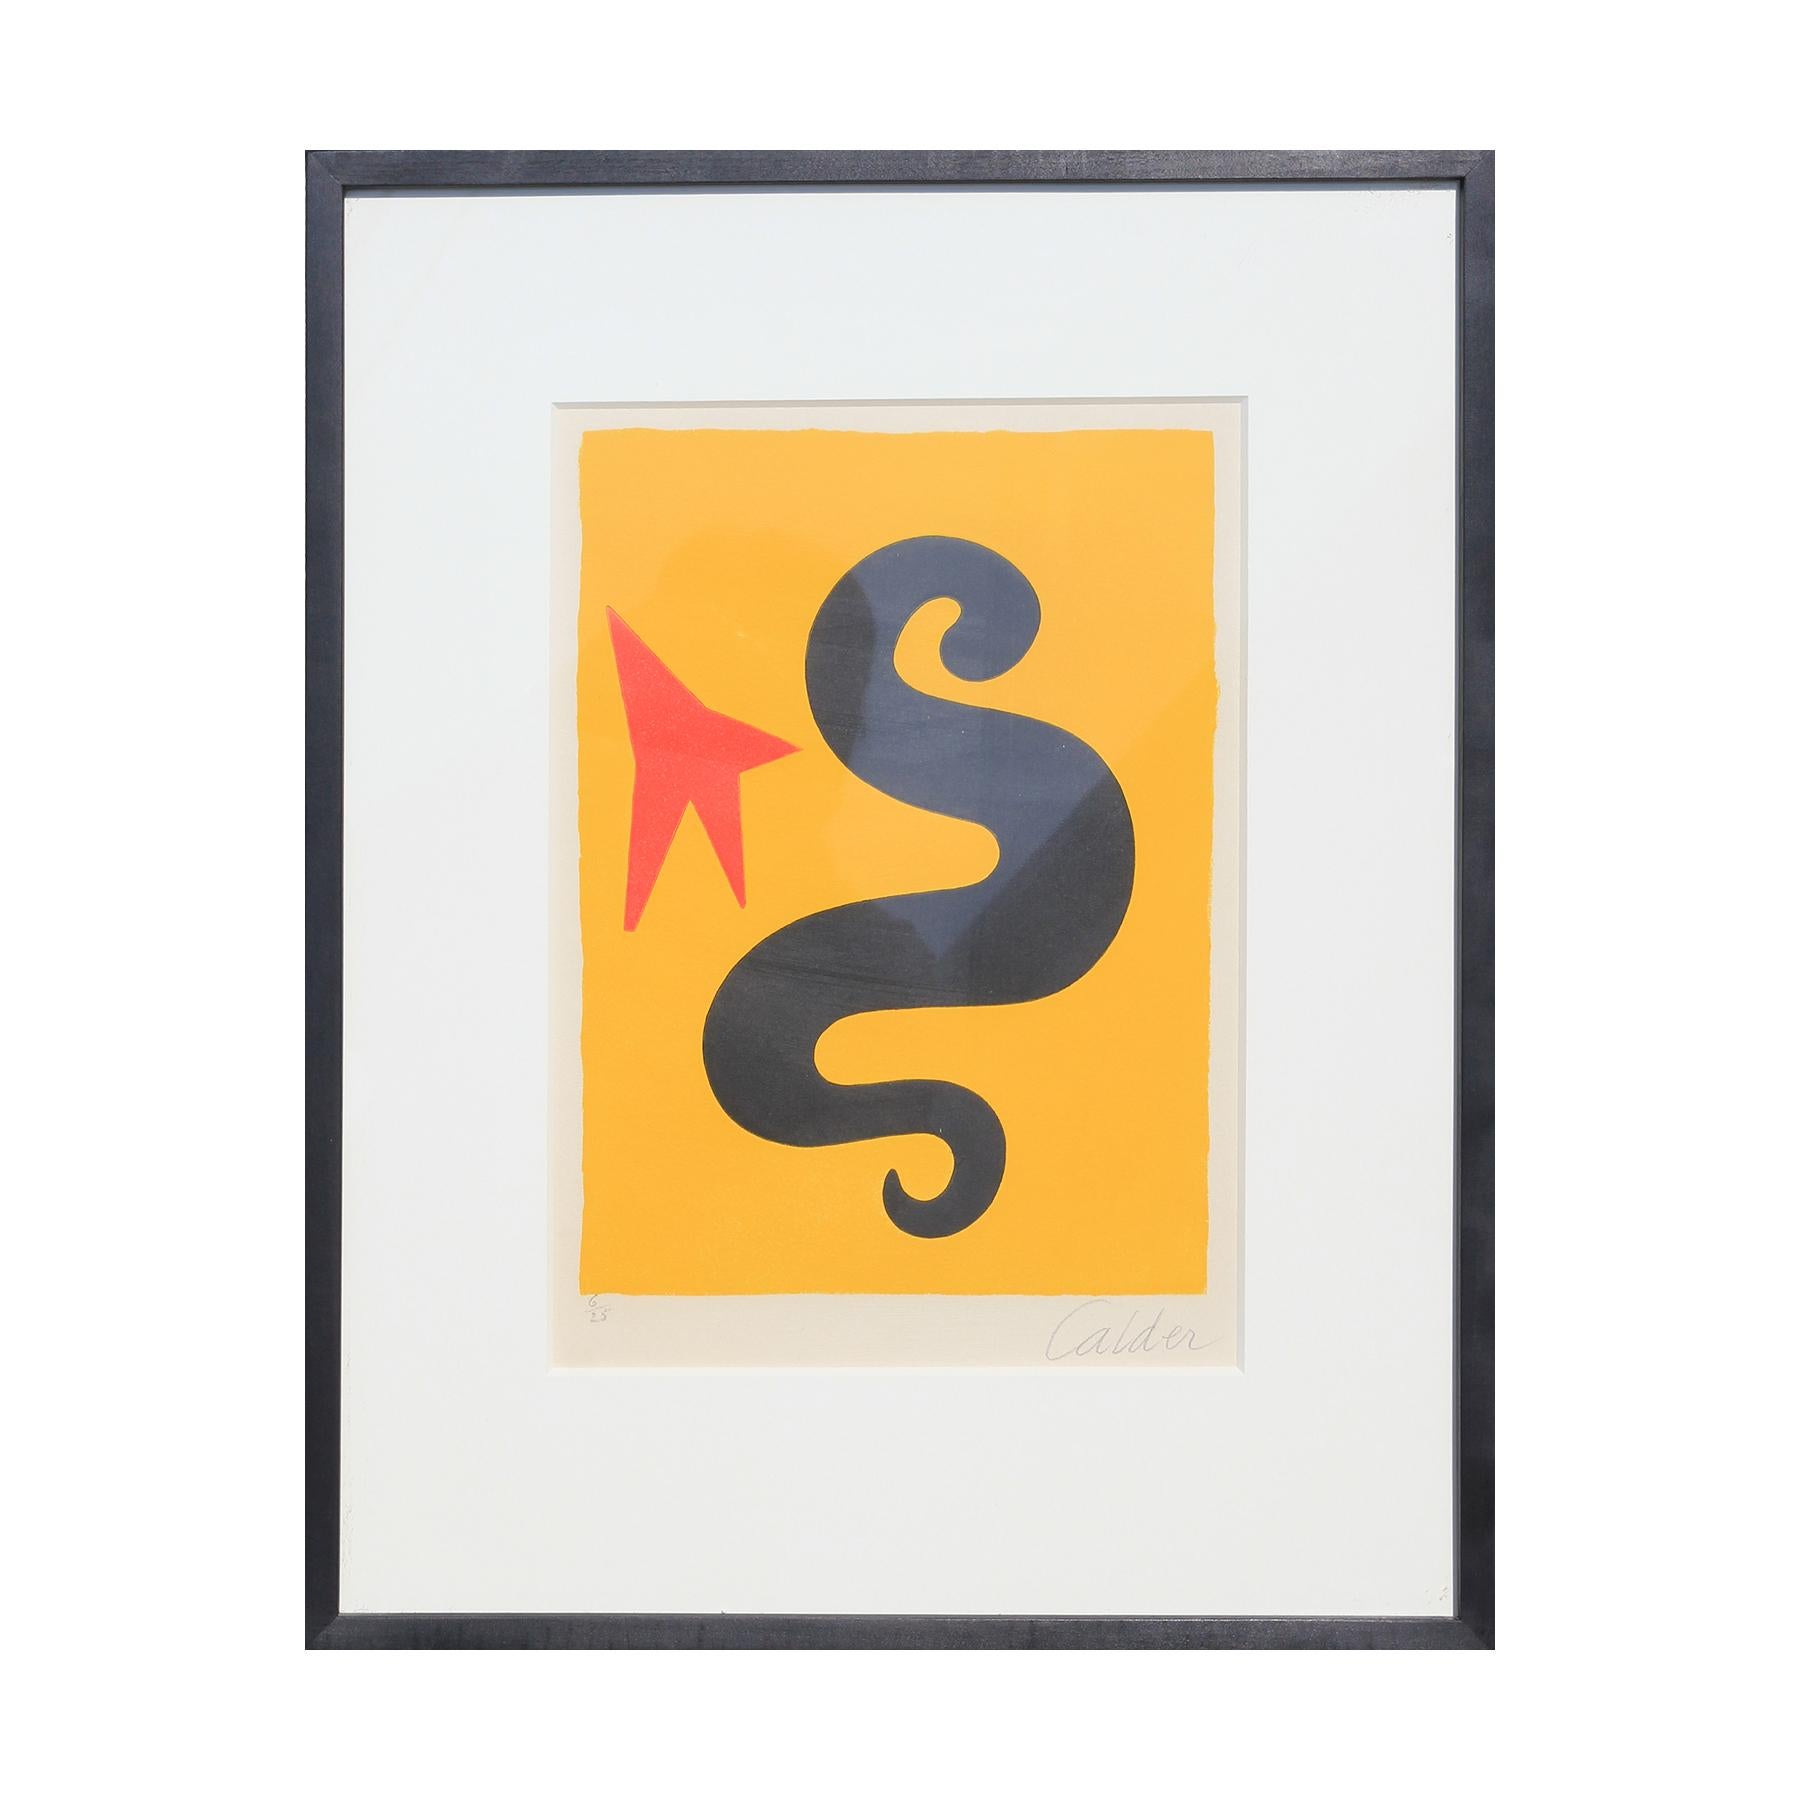 Alexander Calder Abstract Print - Yellow and Red Abstract Lithograph 6/25